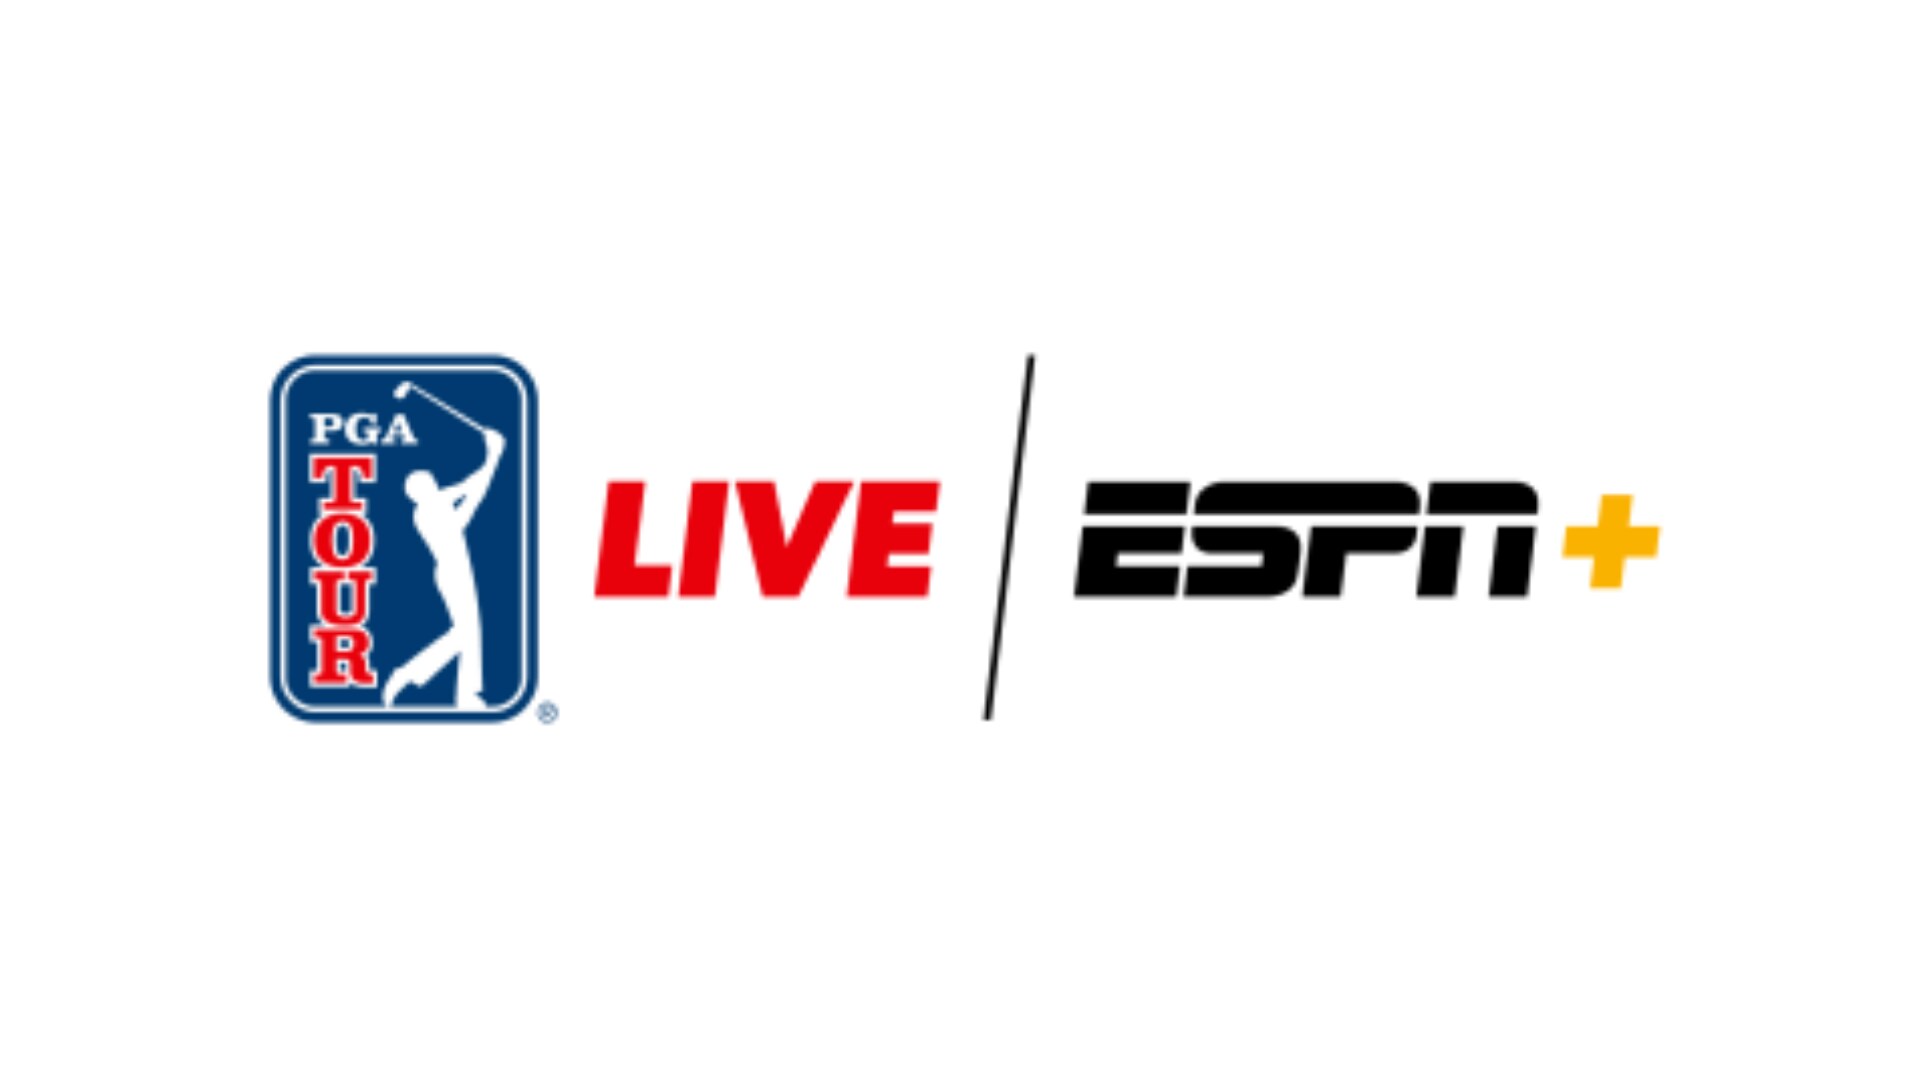 PGA TOUR LIVE Four-Stream Coverage to Include Major Champions, Recent TOUR Winners at Arnold Palmer Invitational at Bay Hill in Orlando, Exclusively on ESPN+